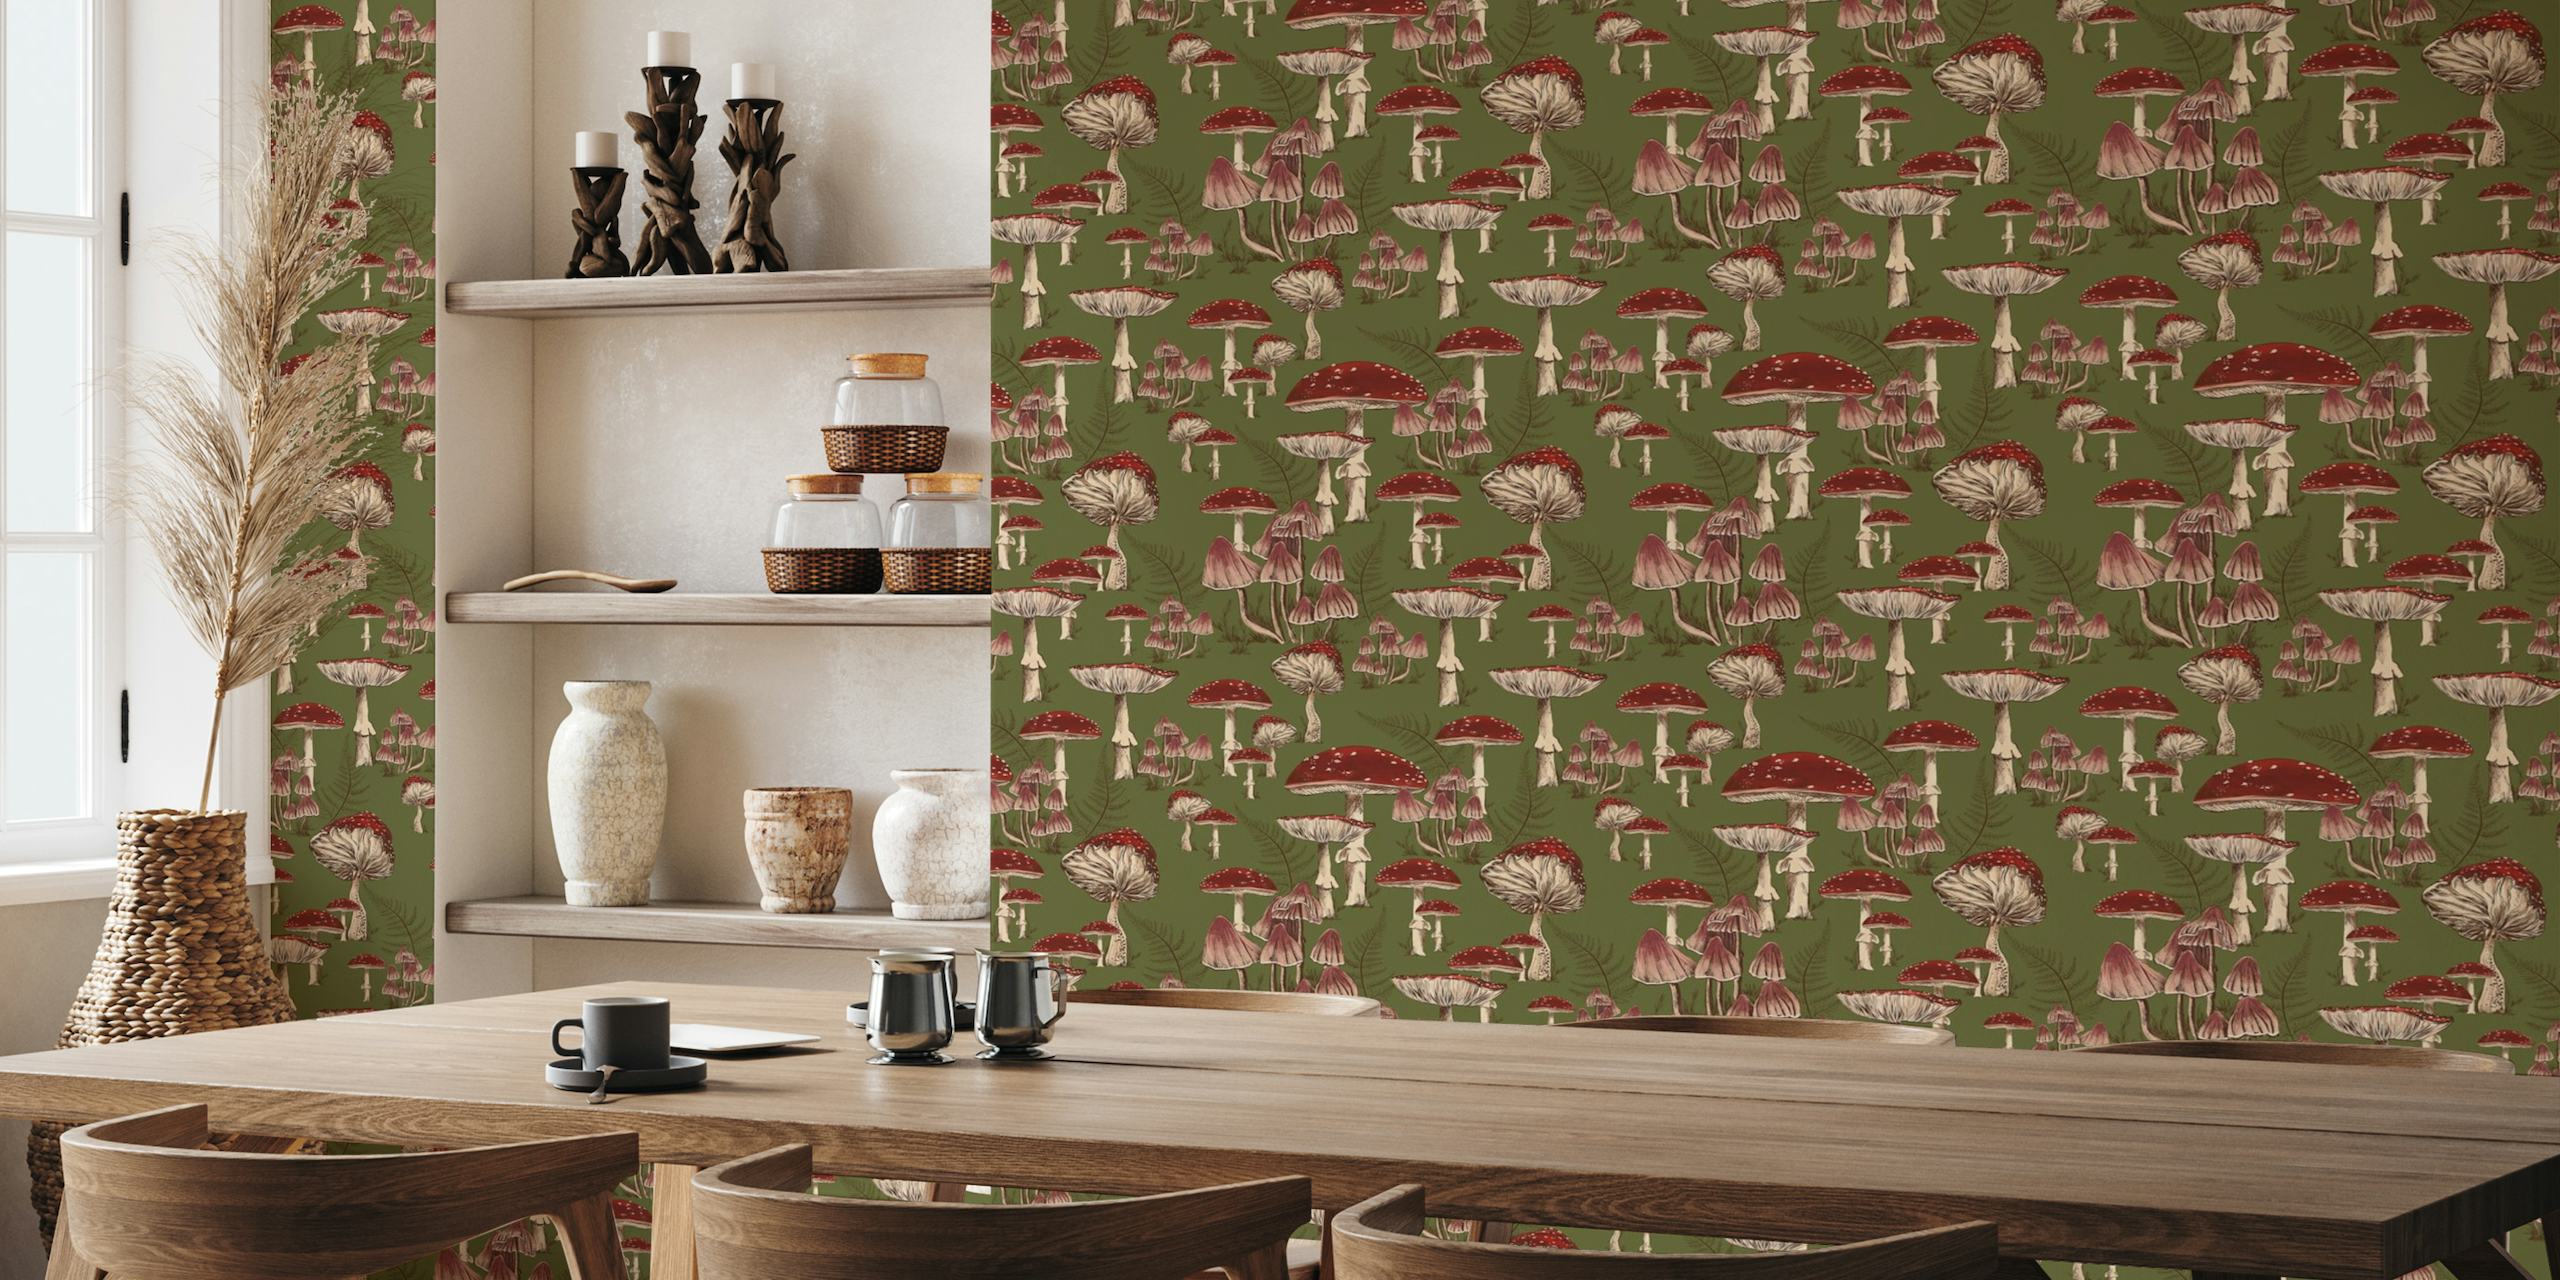 Fly Agaric mushroom pattern wall mural on green background